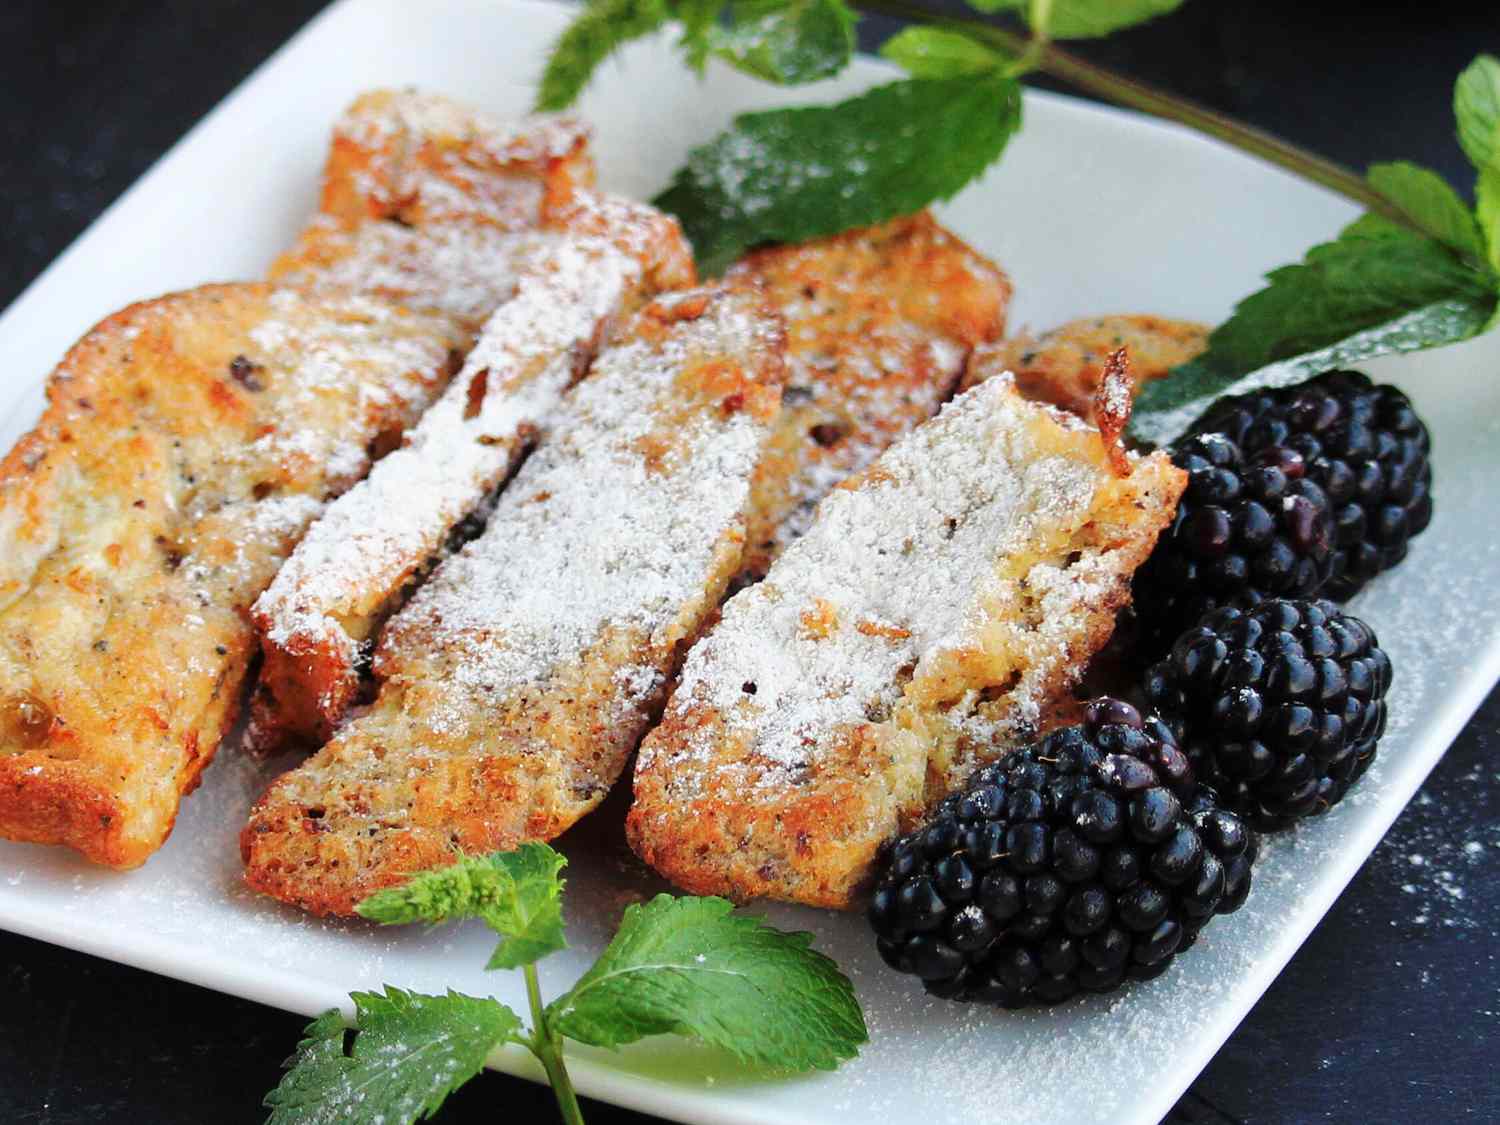 close up view of French Toast Sticks garnished with powdered sugar, served with blackberries and fresh mint on a white plate